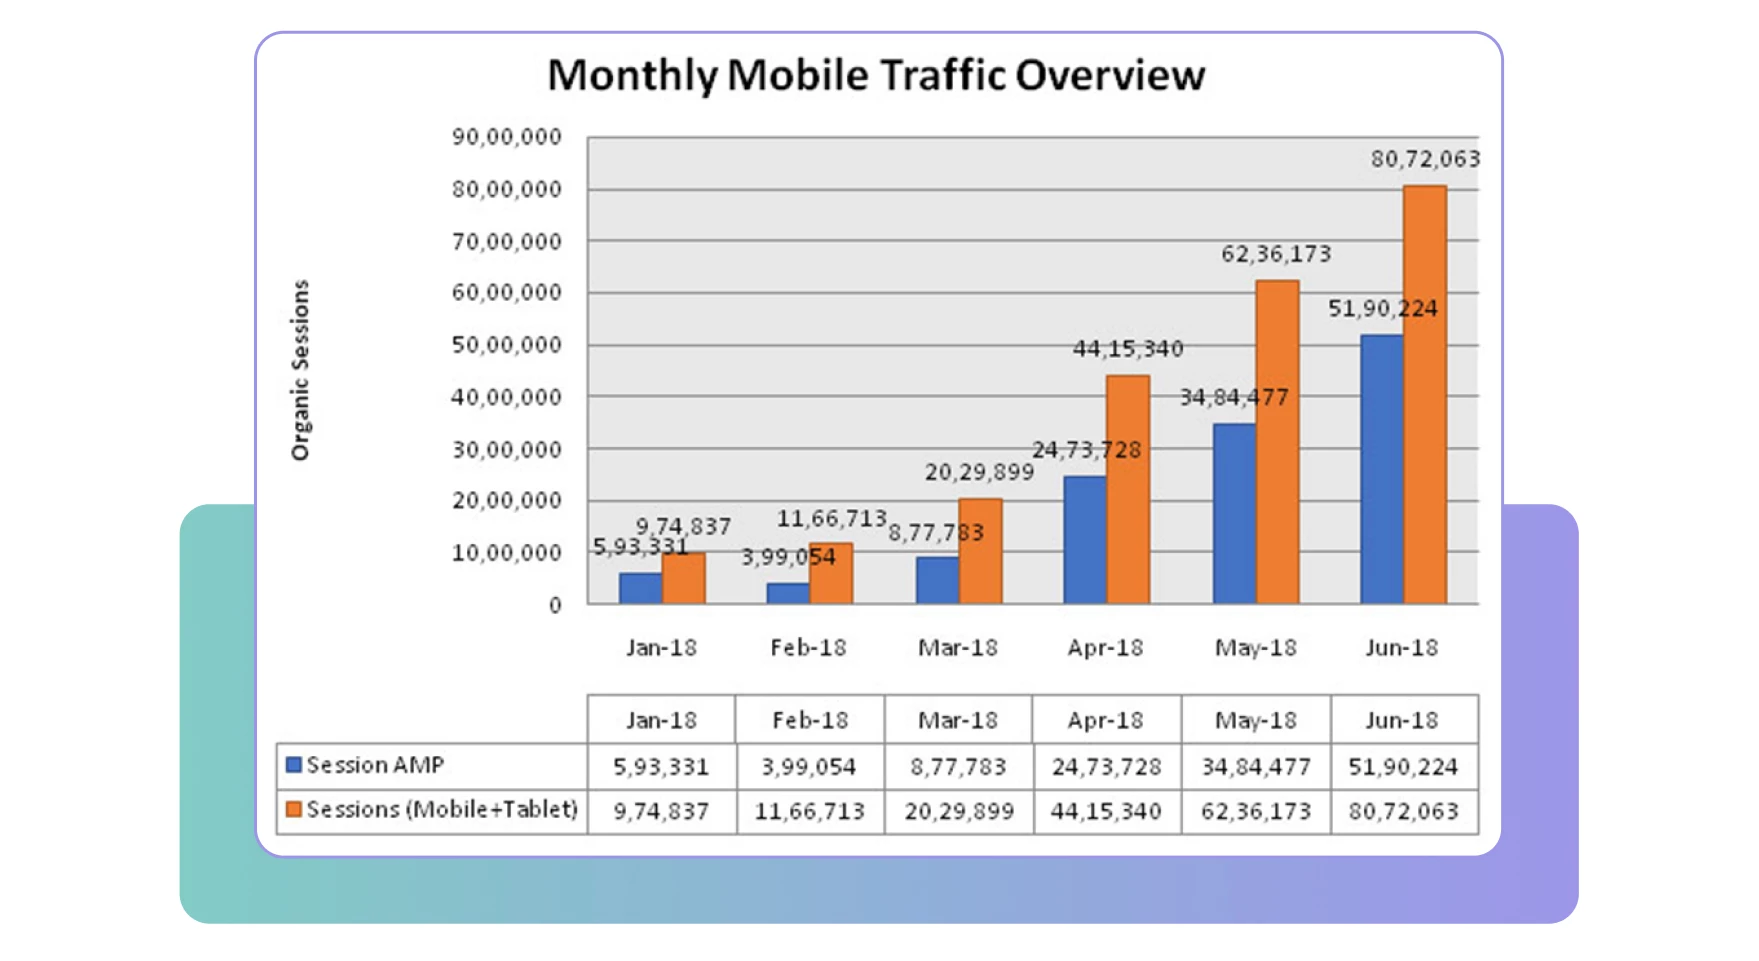 Mounthly mobile traffic overview